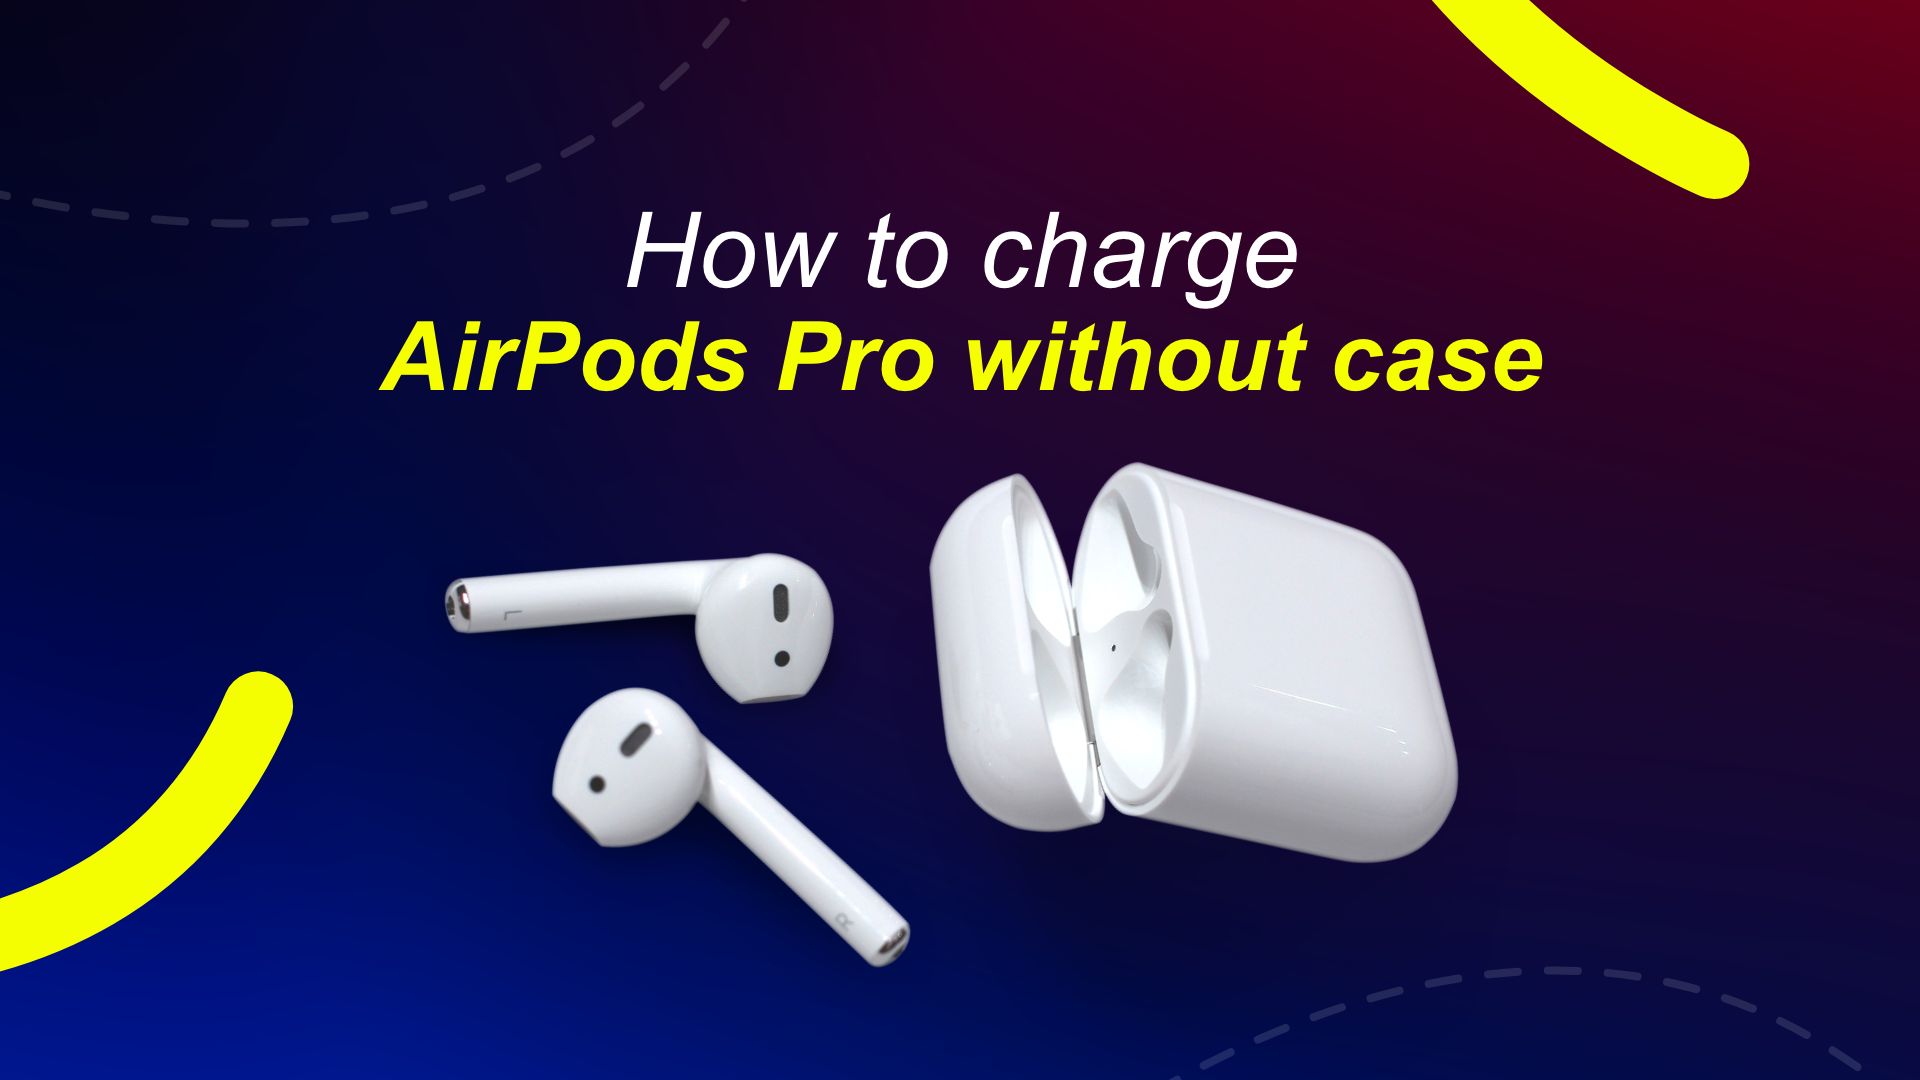 How to charge AirPods Pro without case